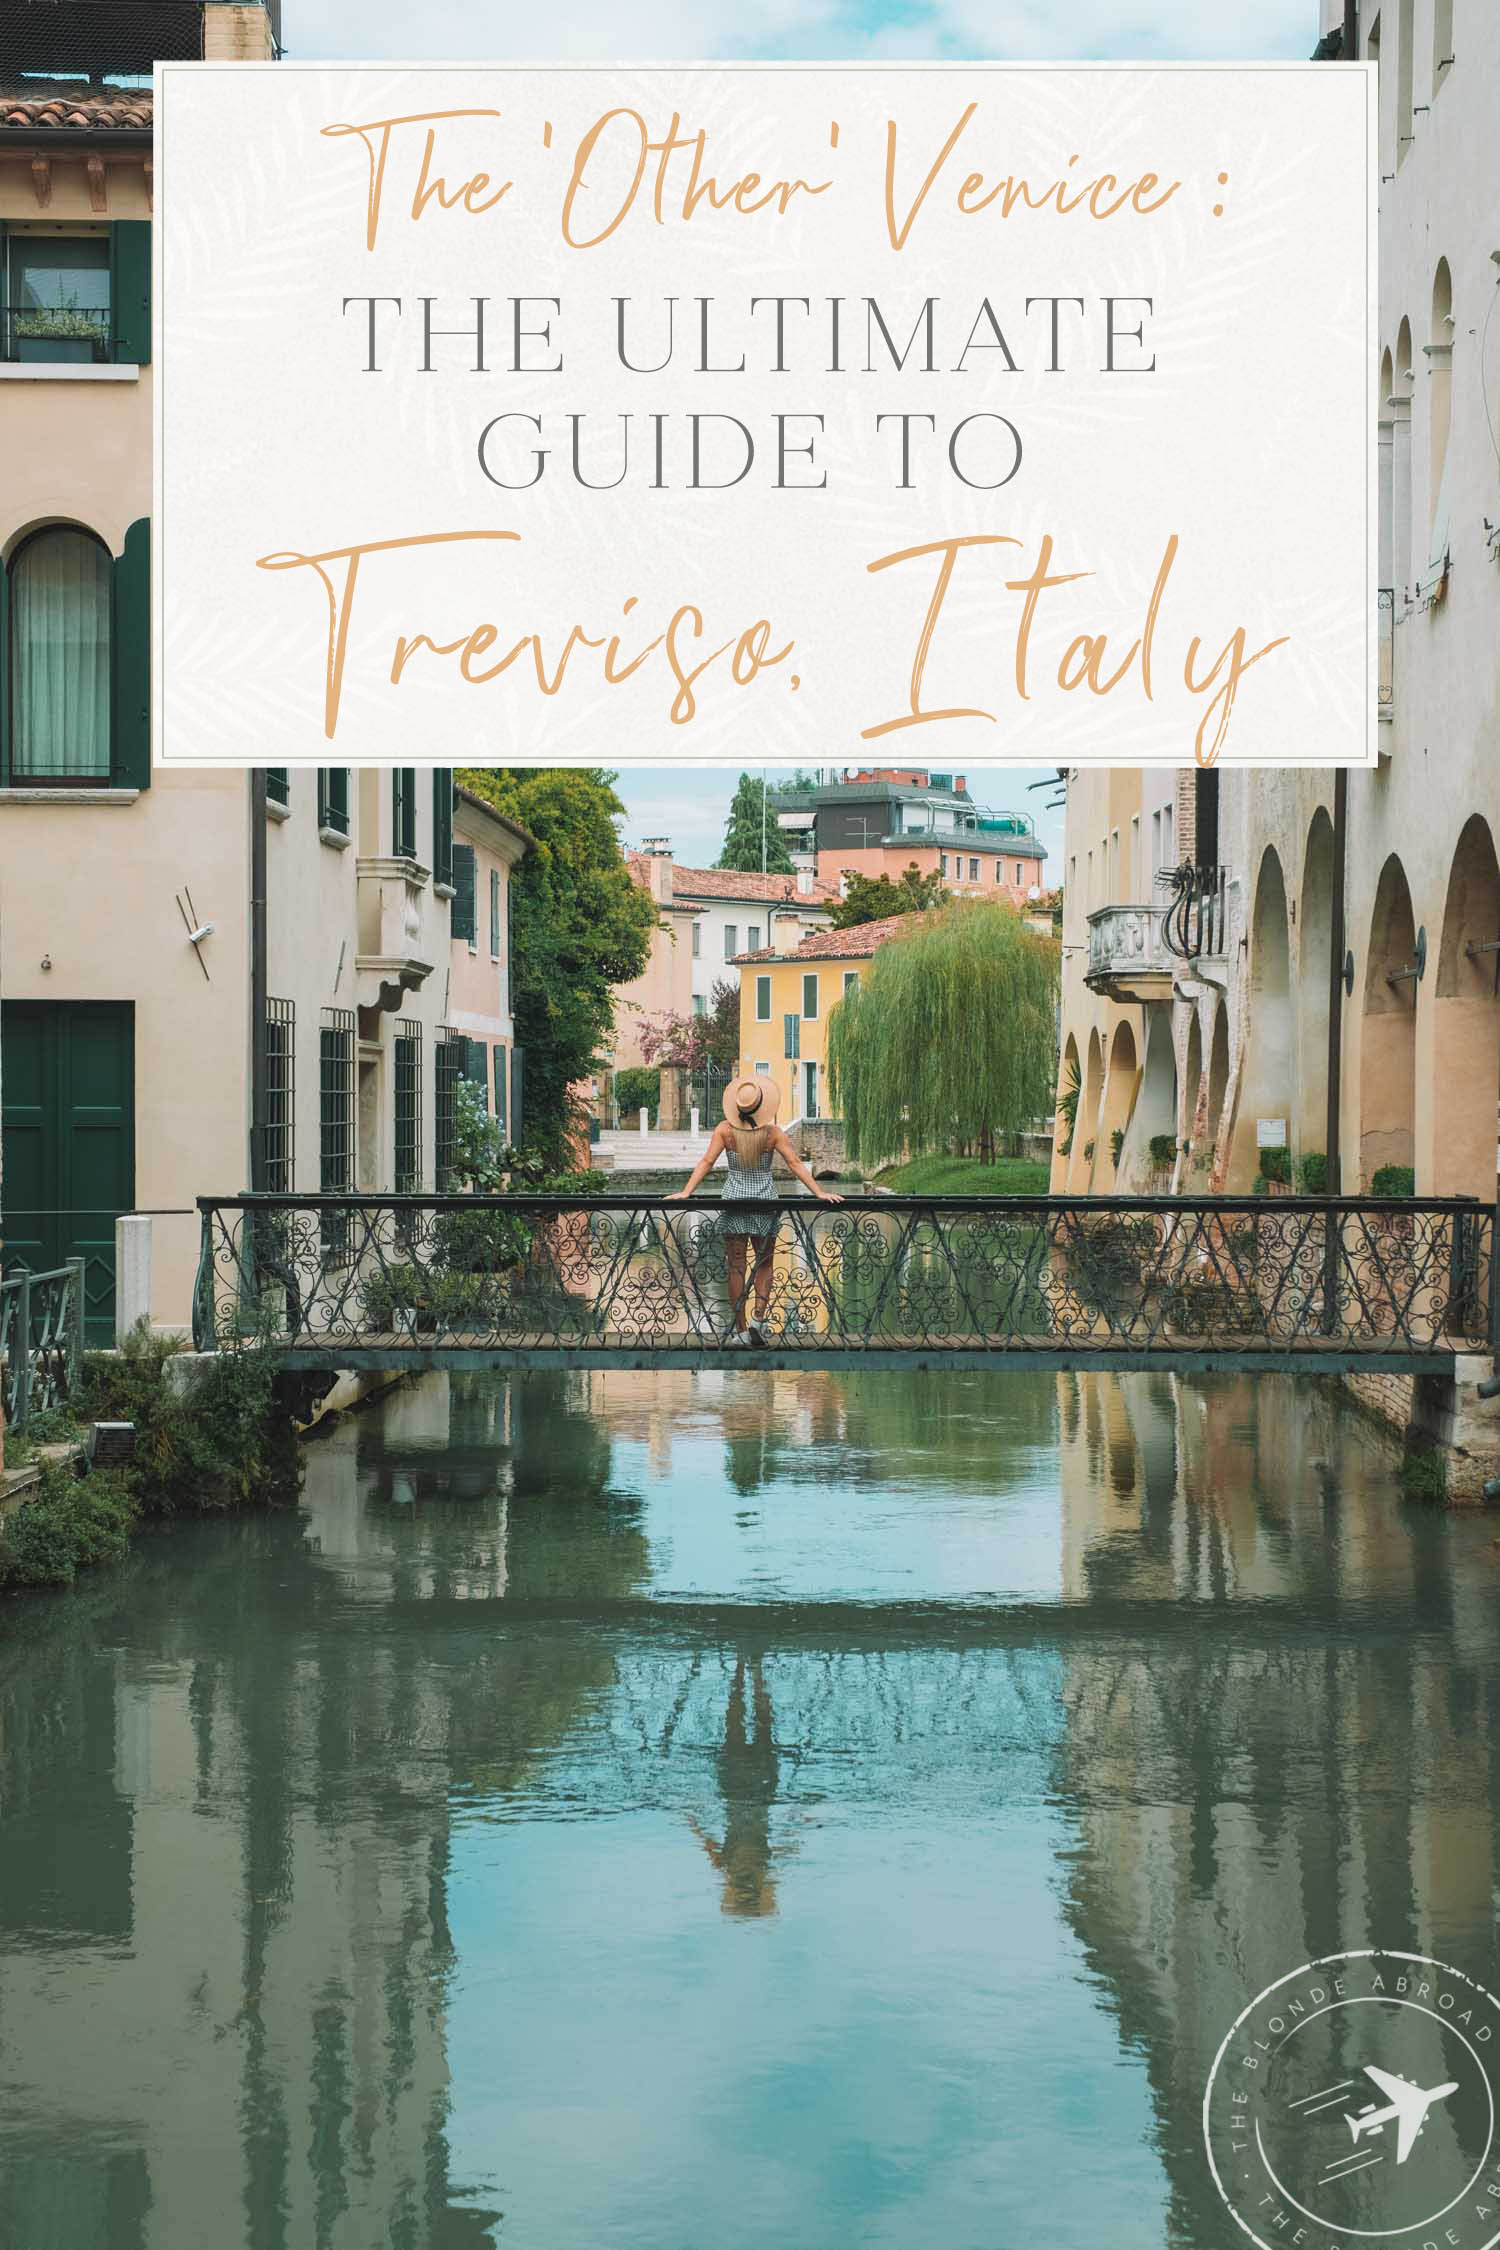 The Ultimate Guide to Treviso